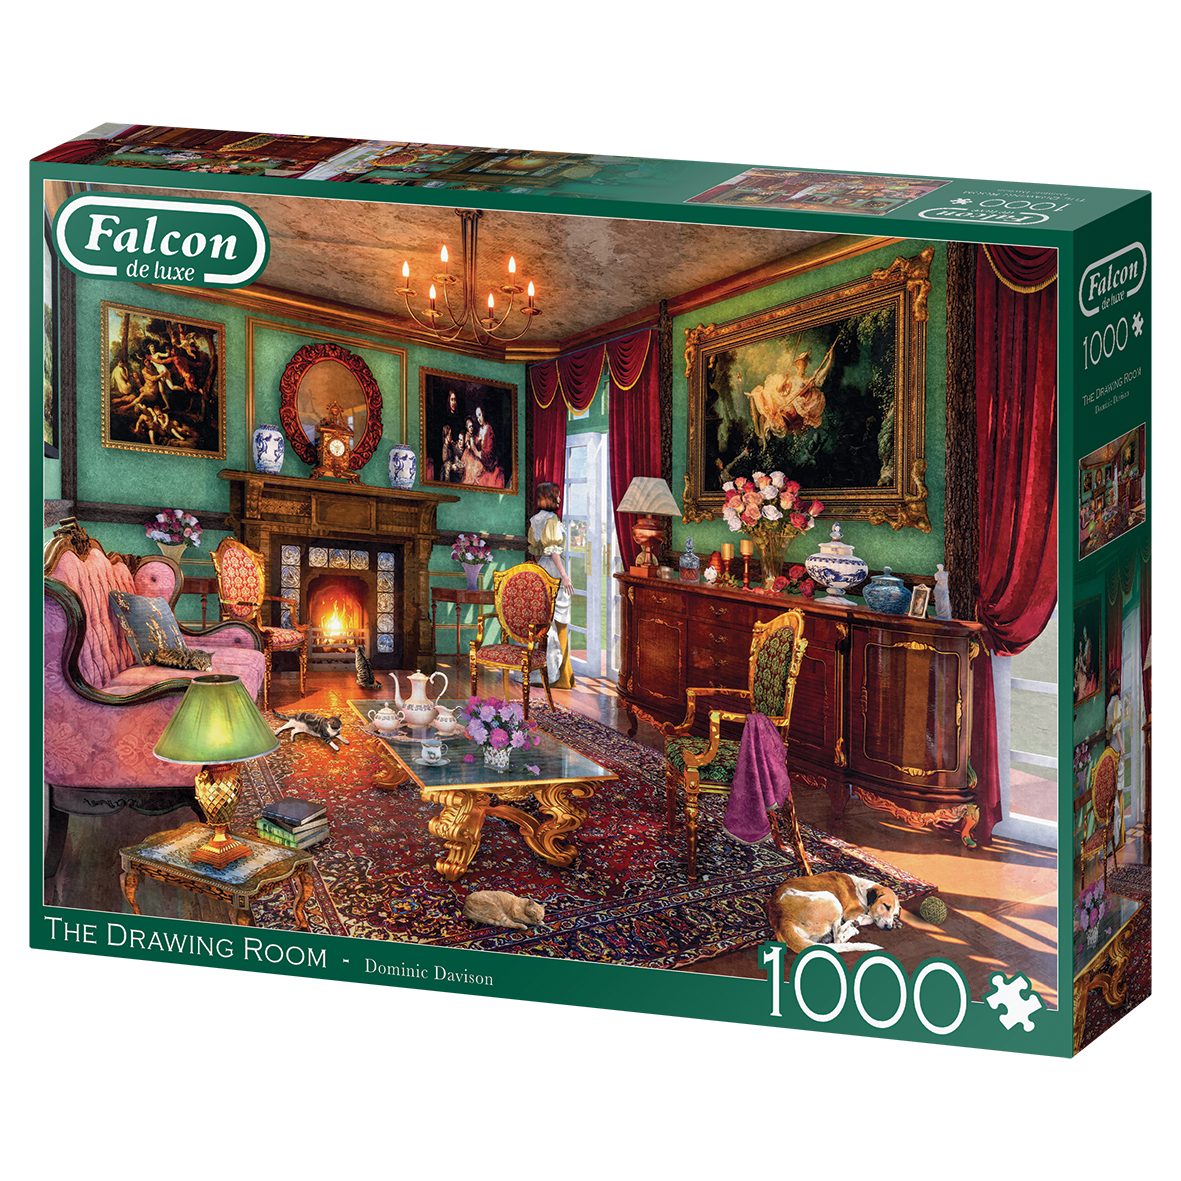 Falcon DeLuxe - The Drawing Room - 1000 Piece Jigsaw Puzzle